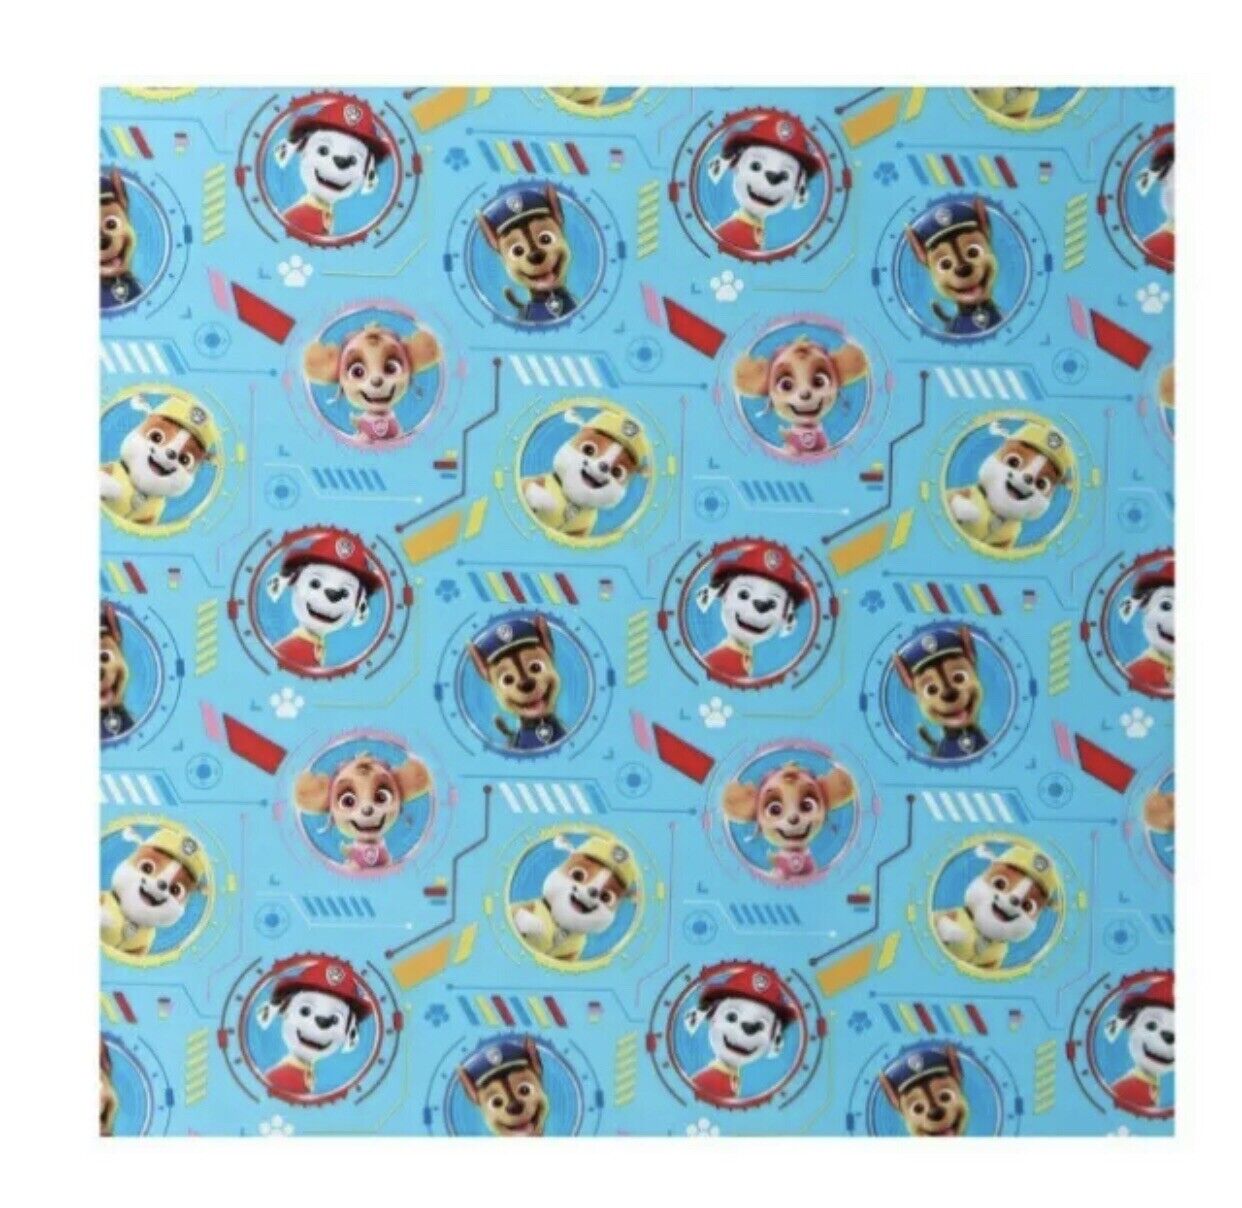 Nickelodeon: Paw Patrol All Occassion Gift Wrap 30